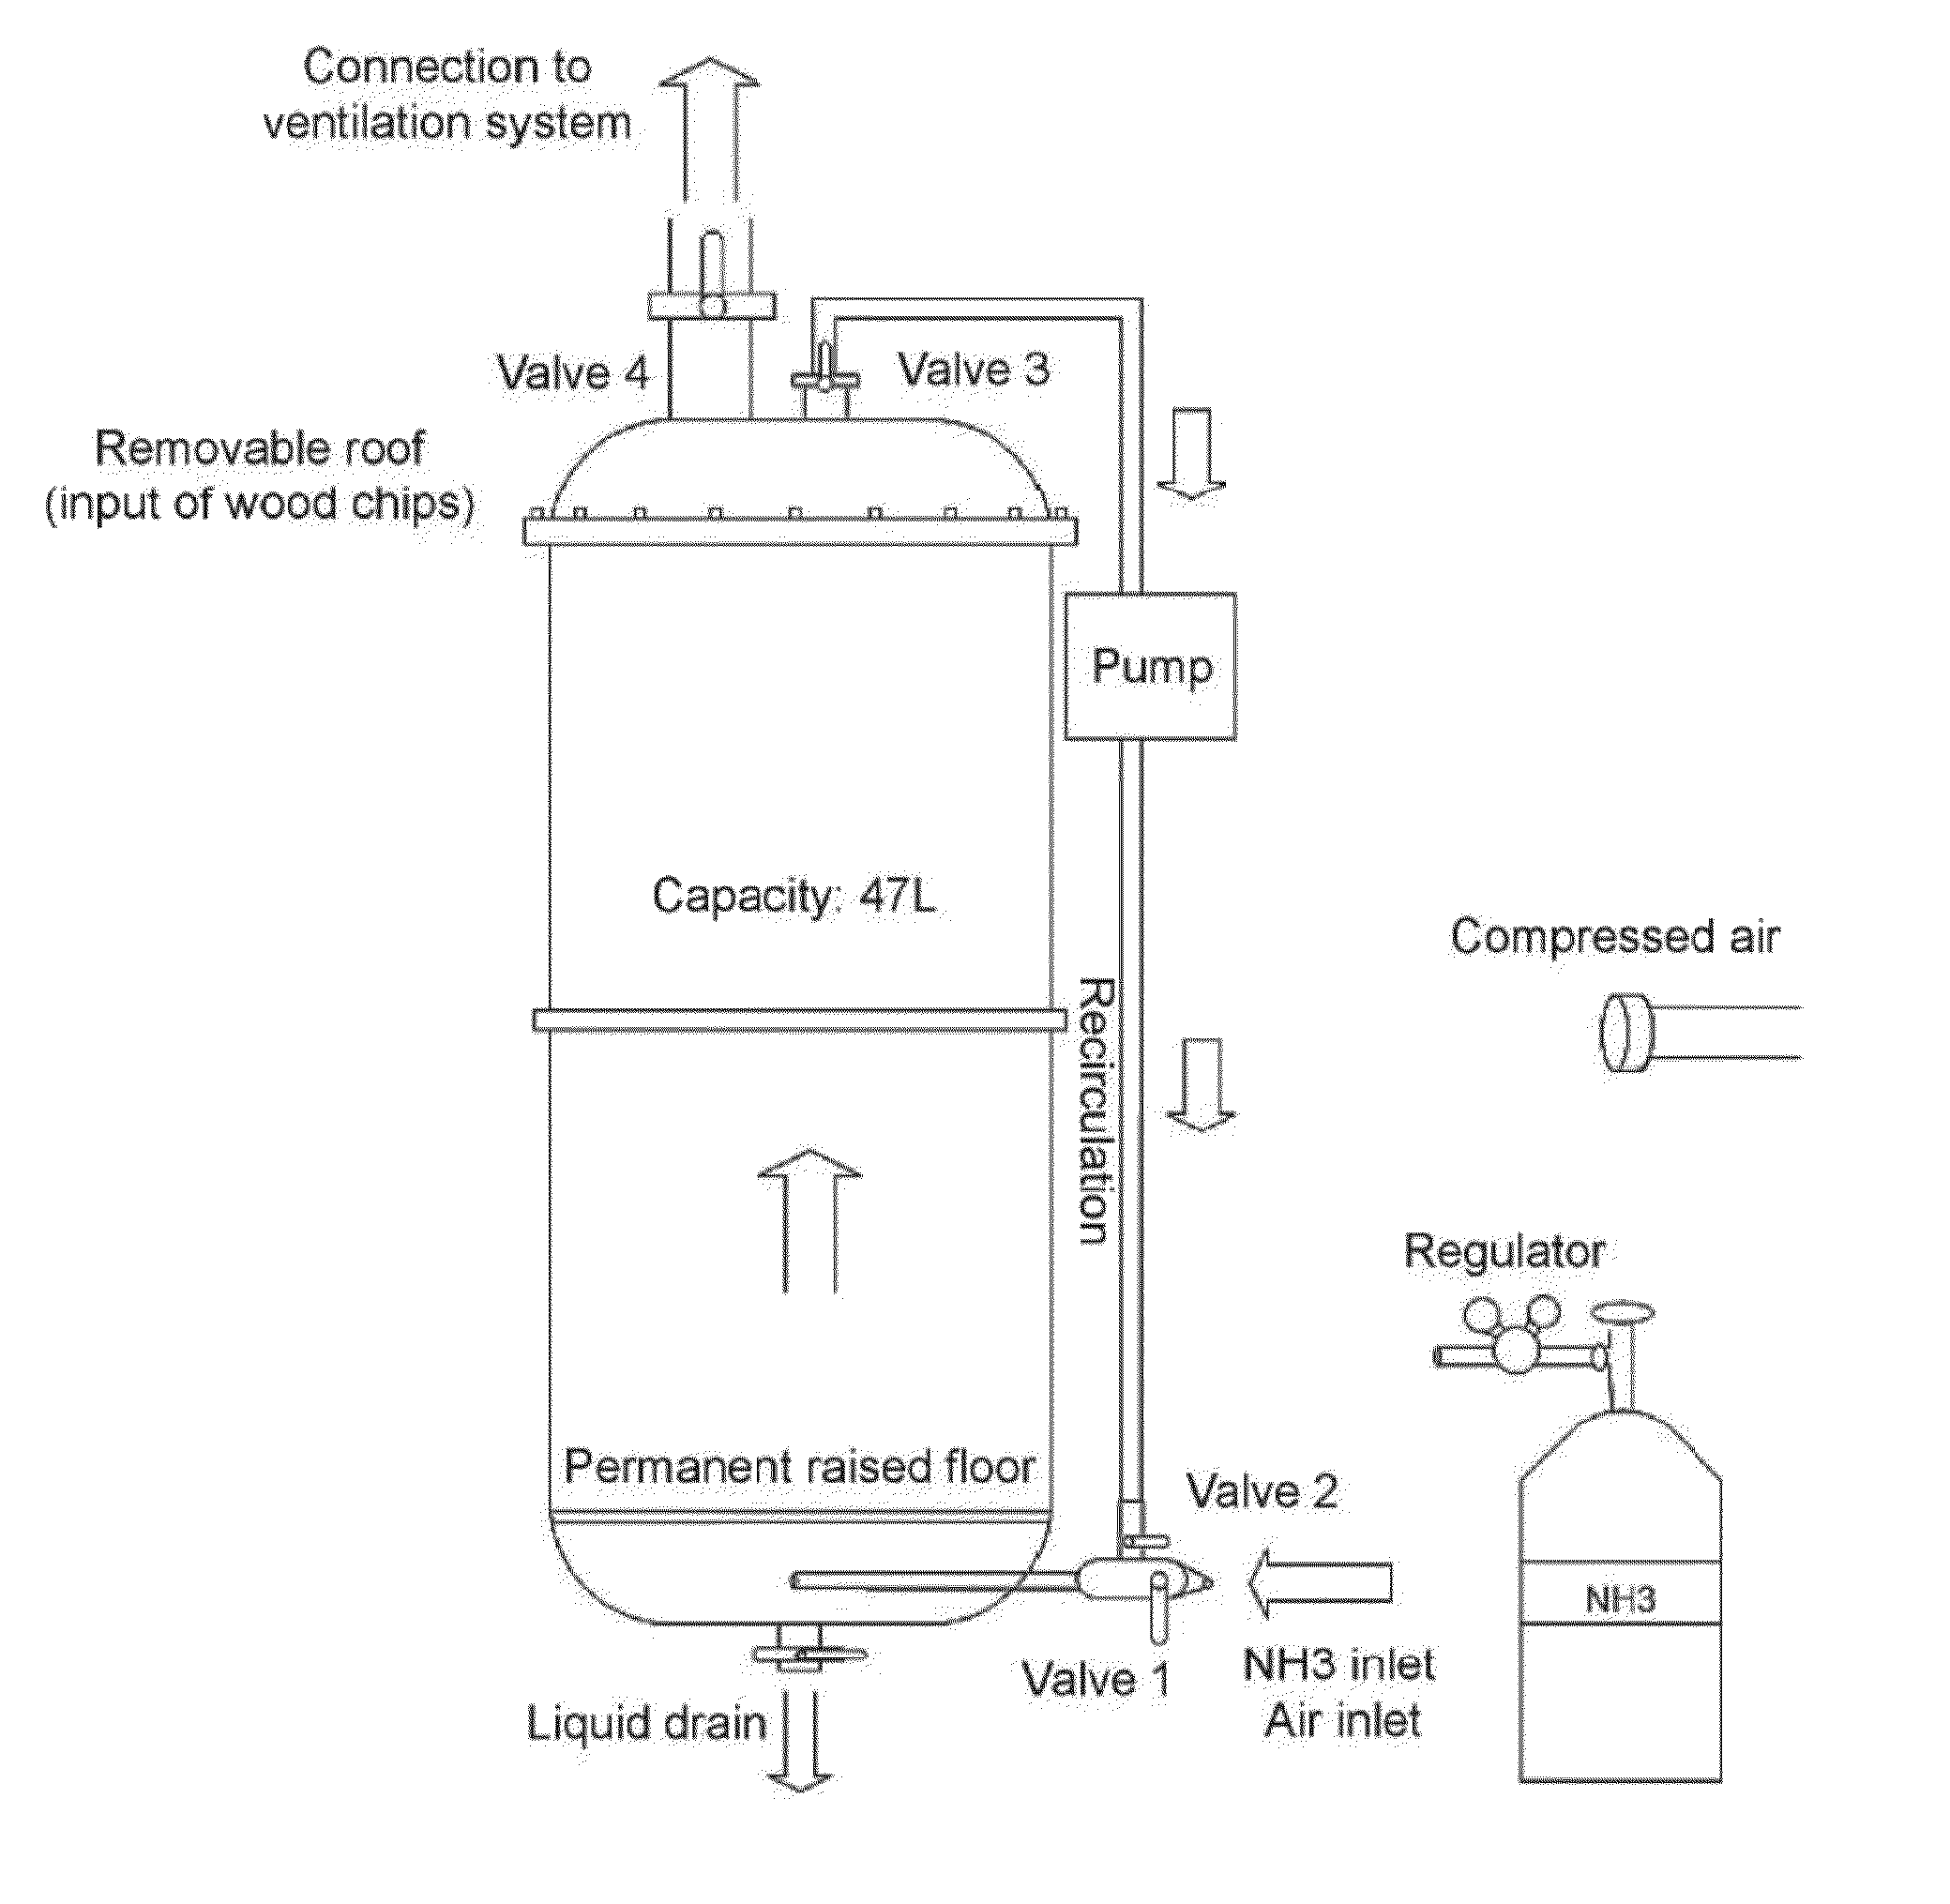 System and method for treating waste water by means of passive phosphorus capture